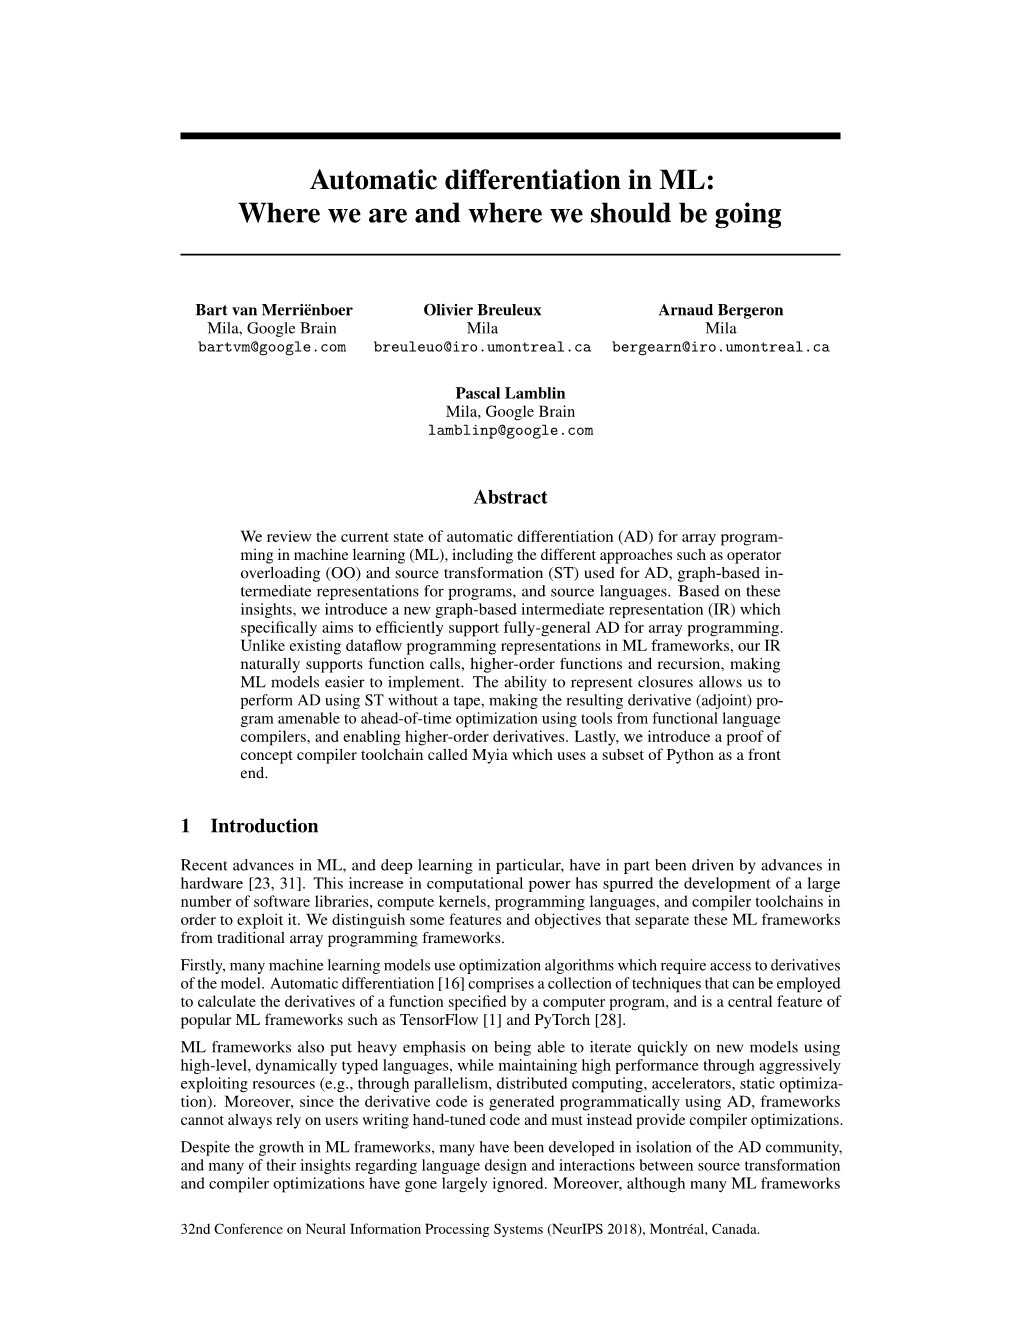 Automatic Differentiation in ML: Where We Are and Where We Should Be Going